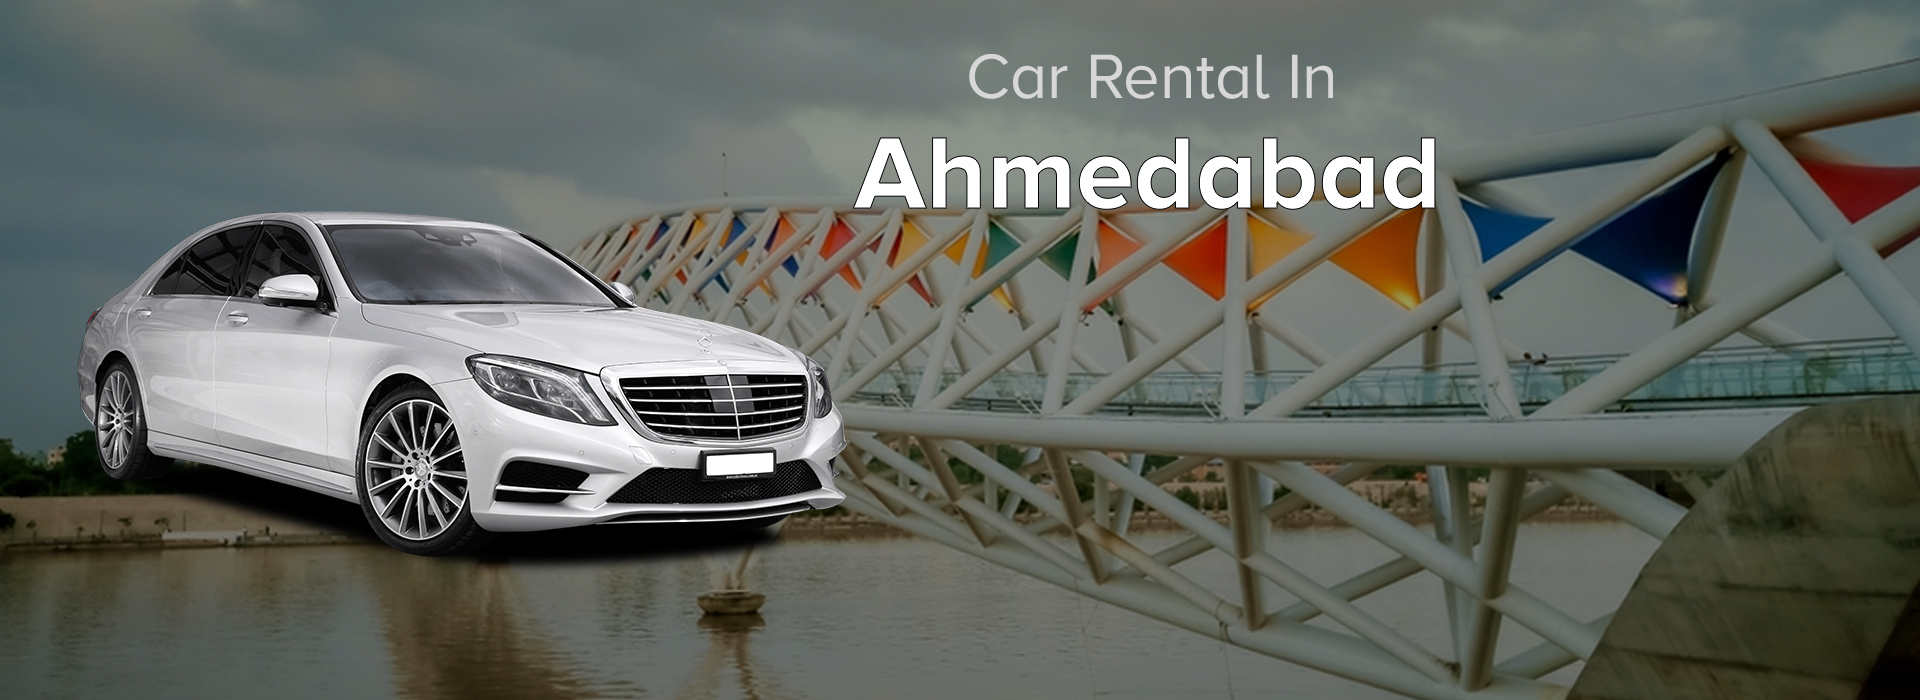  Rent a Car in Ahmedabad